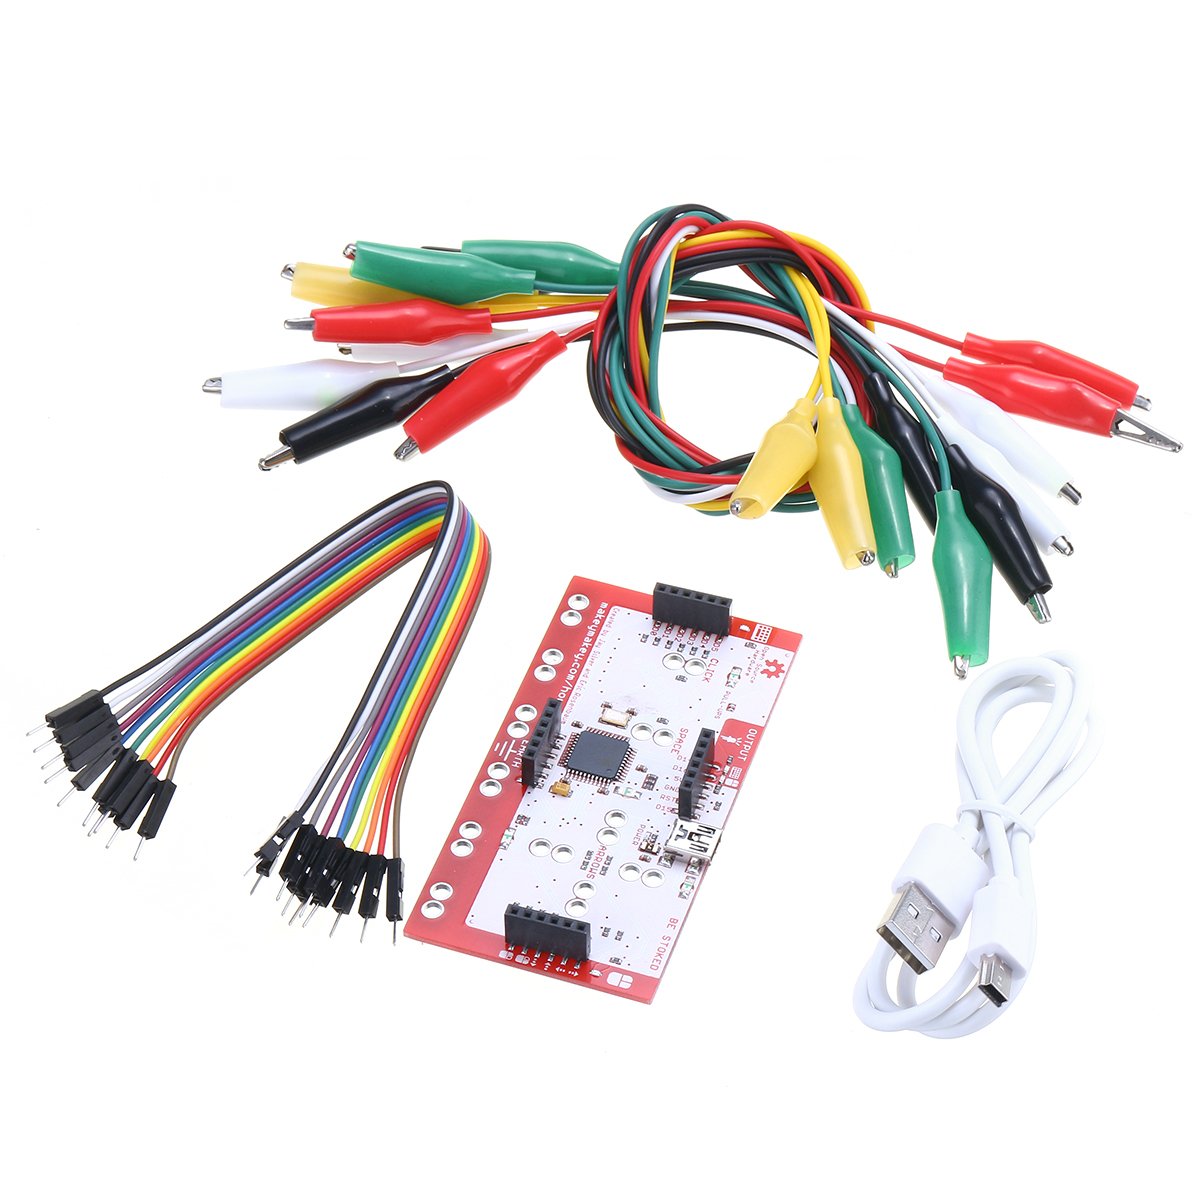 Alligator Clip Jumper Wire Standard Controller Board Kit for Makey Makey Science Toy 1